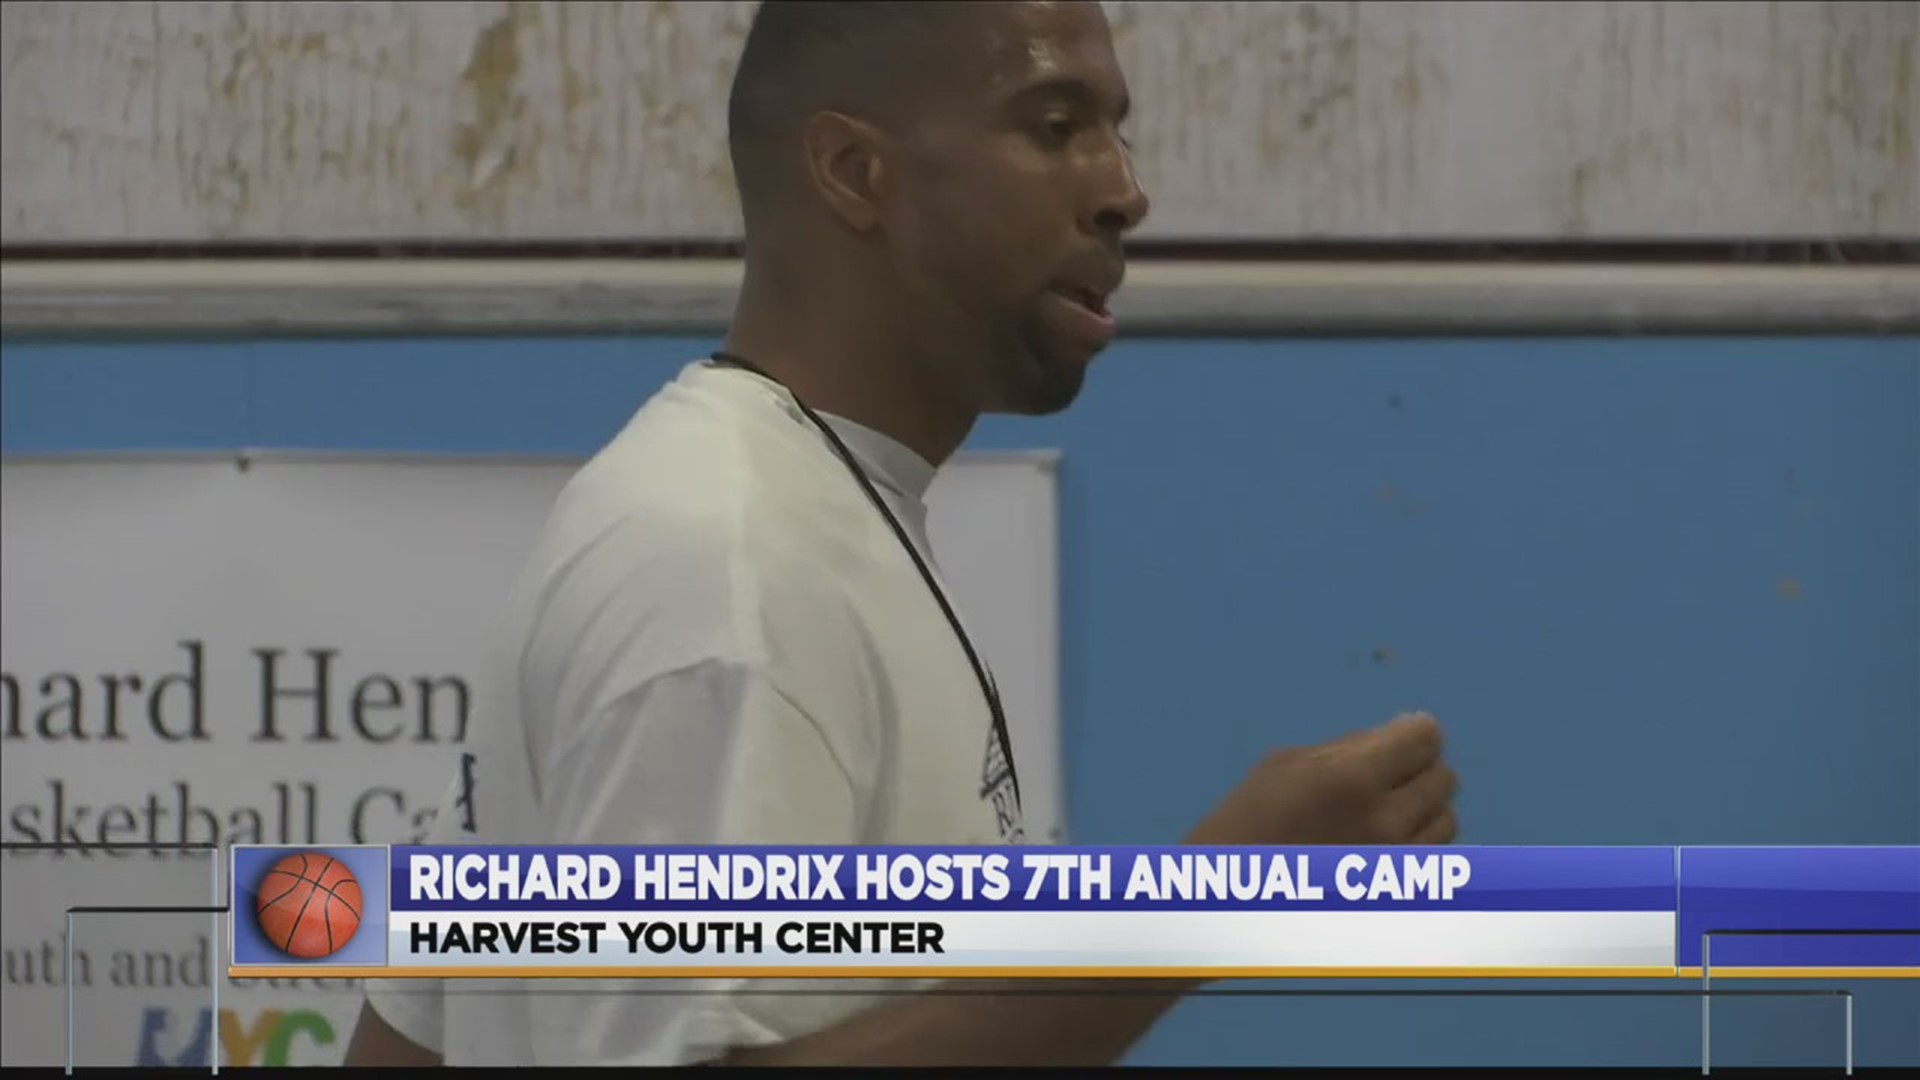 For the 7th year in a row, Richard Hendrix returned to the Harvest Youth Club to host his annual basketball camp. The Mr. Basketball Winner is back for the summer after competing in France with Le Mans.